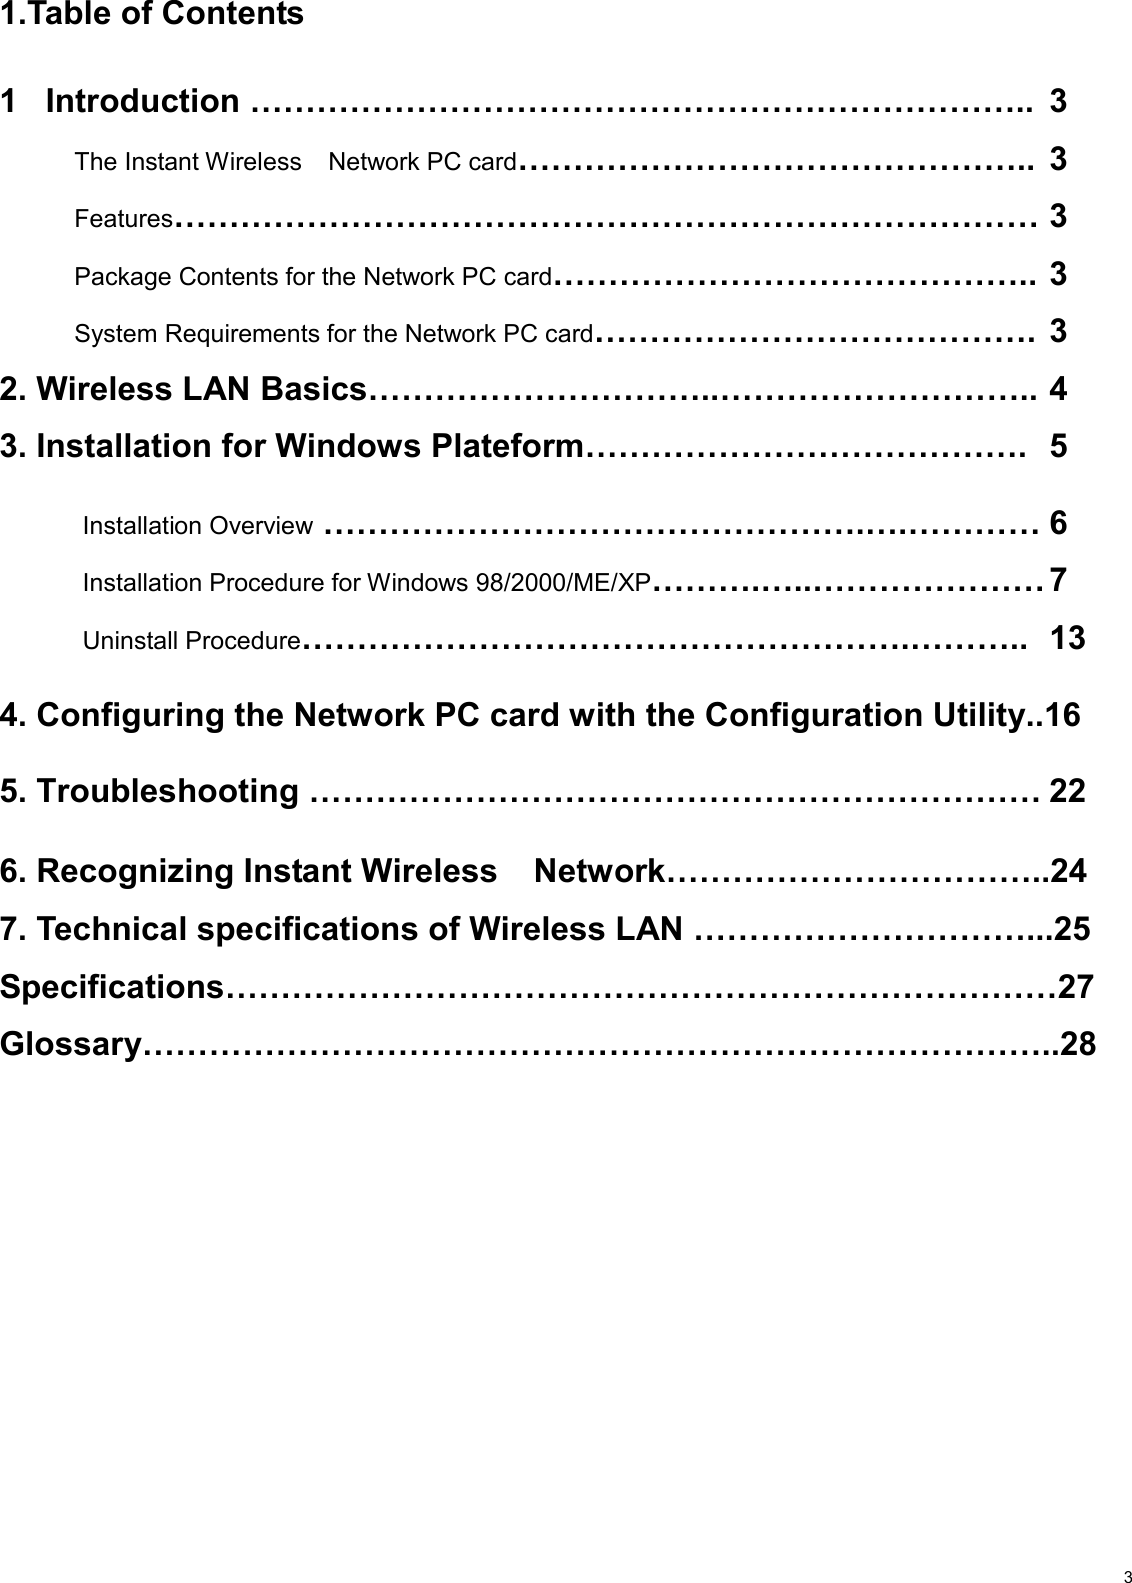                                                                                                                                                                                           31.Table of Contents  1   Introduction ……………………………………………………………..  3  The Instant Wireless  Network PC card……………………………………….. 3  Features…………………………………………………………………… 3   Package Contents for the Network PC card…………………………………….. 3   System Requirements for the Network PC card…………………………………. 3 2. Wireless LAN Basics…………………………..……………………….. 4 3. Installation for Windows Plateform………………………………….  5           Installation Overview ………………………………………….….………… 6          Installation Procedure for Windows 98/2000/ME/XP……….…..………………… 7          Uninstall Procedure……………………………………………….……….. 13  4. Configuring the Network PC card with the Configuration Utility..16  5. Troubleshooting ………………………………………………………… 22  6. Recognizing Instant Wireless  Network……………………………..24  7. Technical specifications of Wireless LAN …………………………...25 Specifications…………………………………………………………………27 Glossary………………………………………………………………………..28